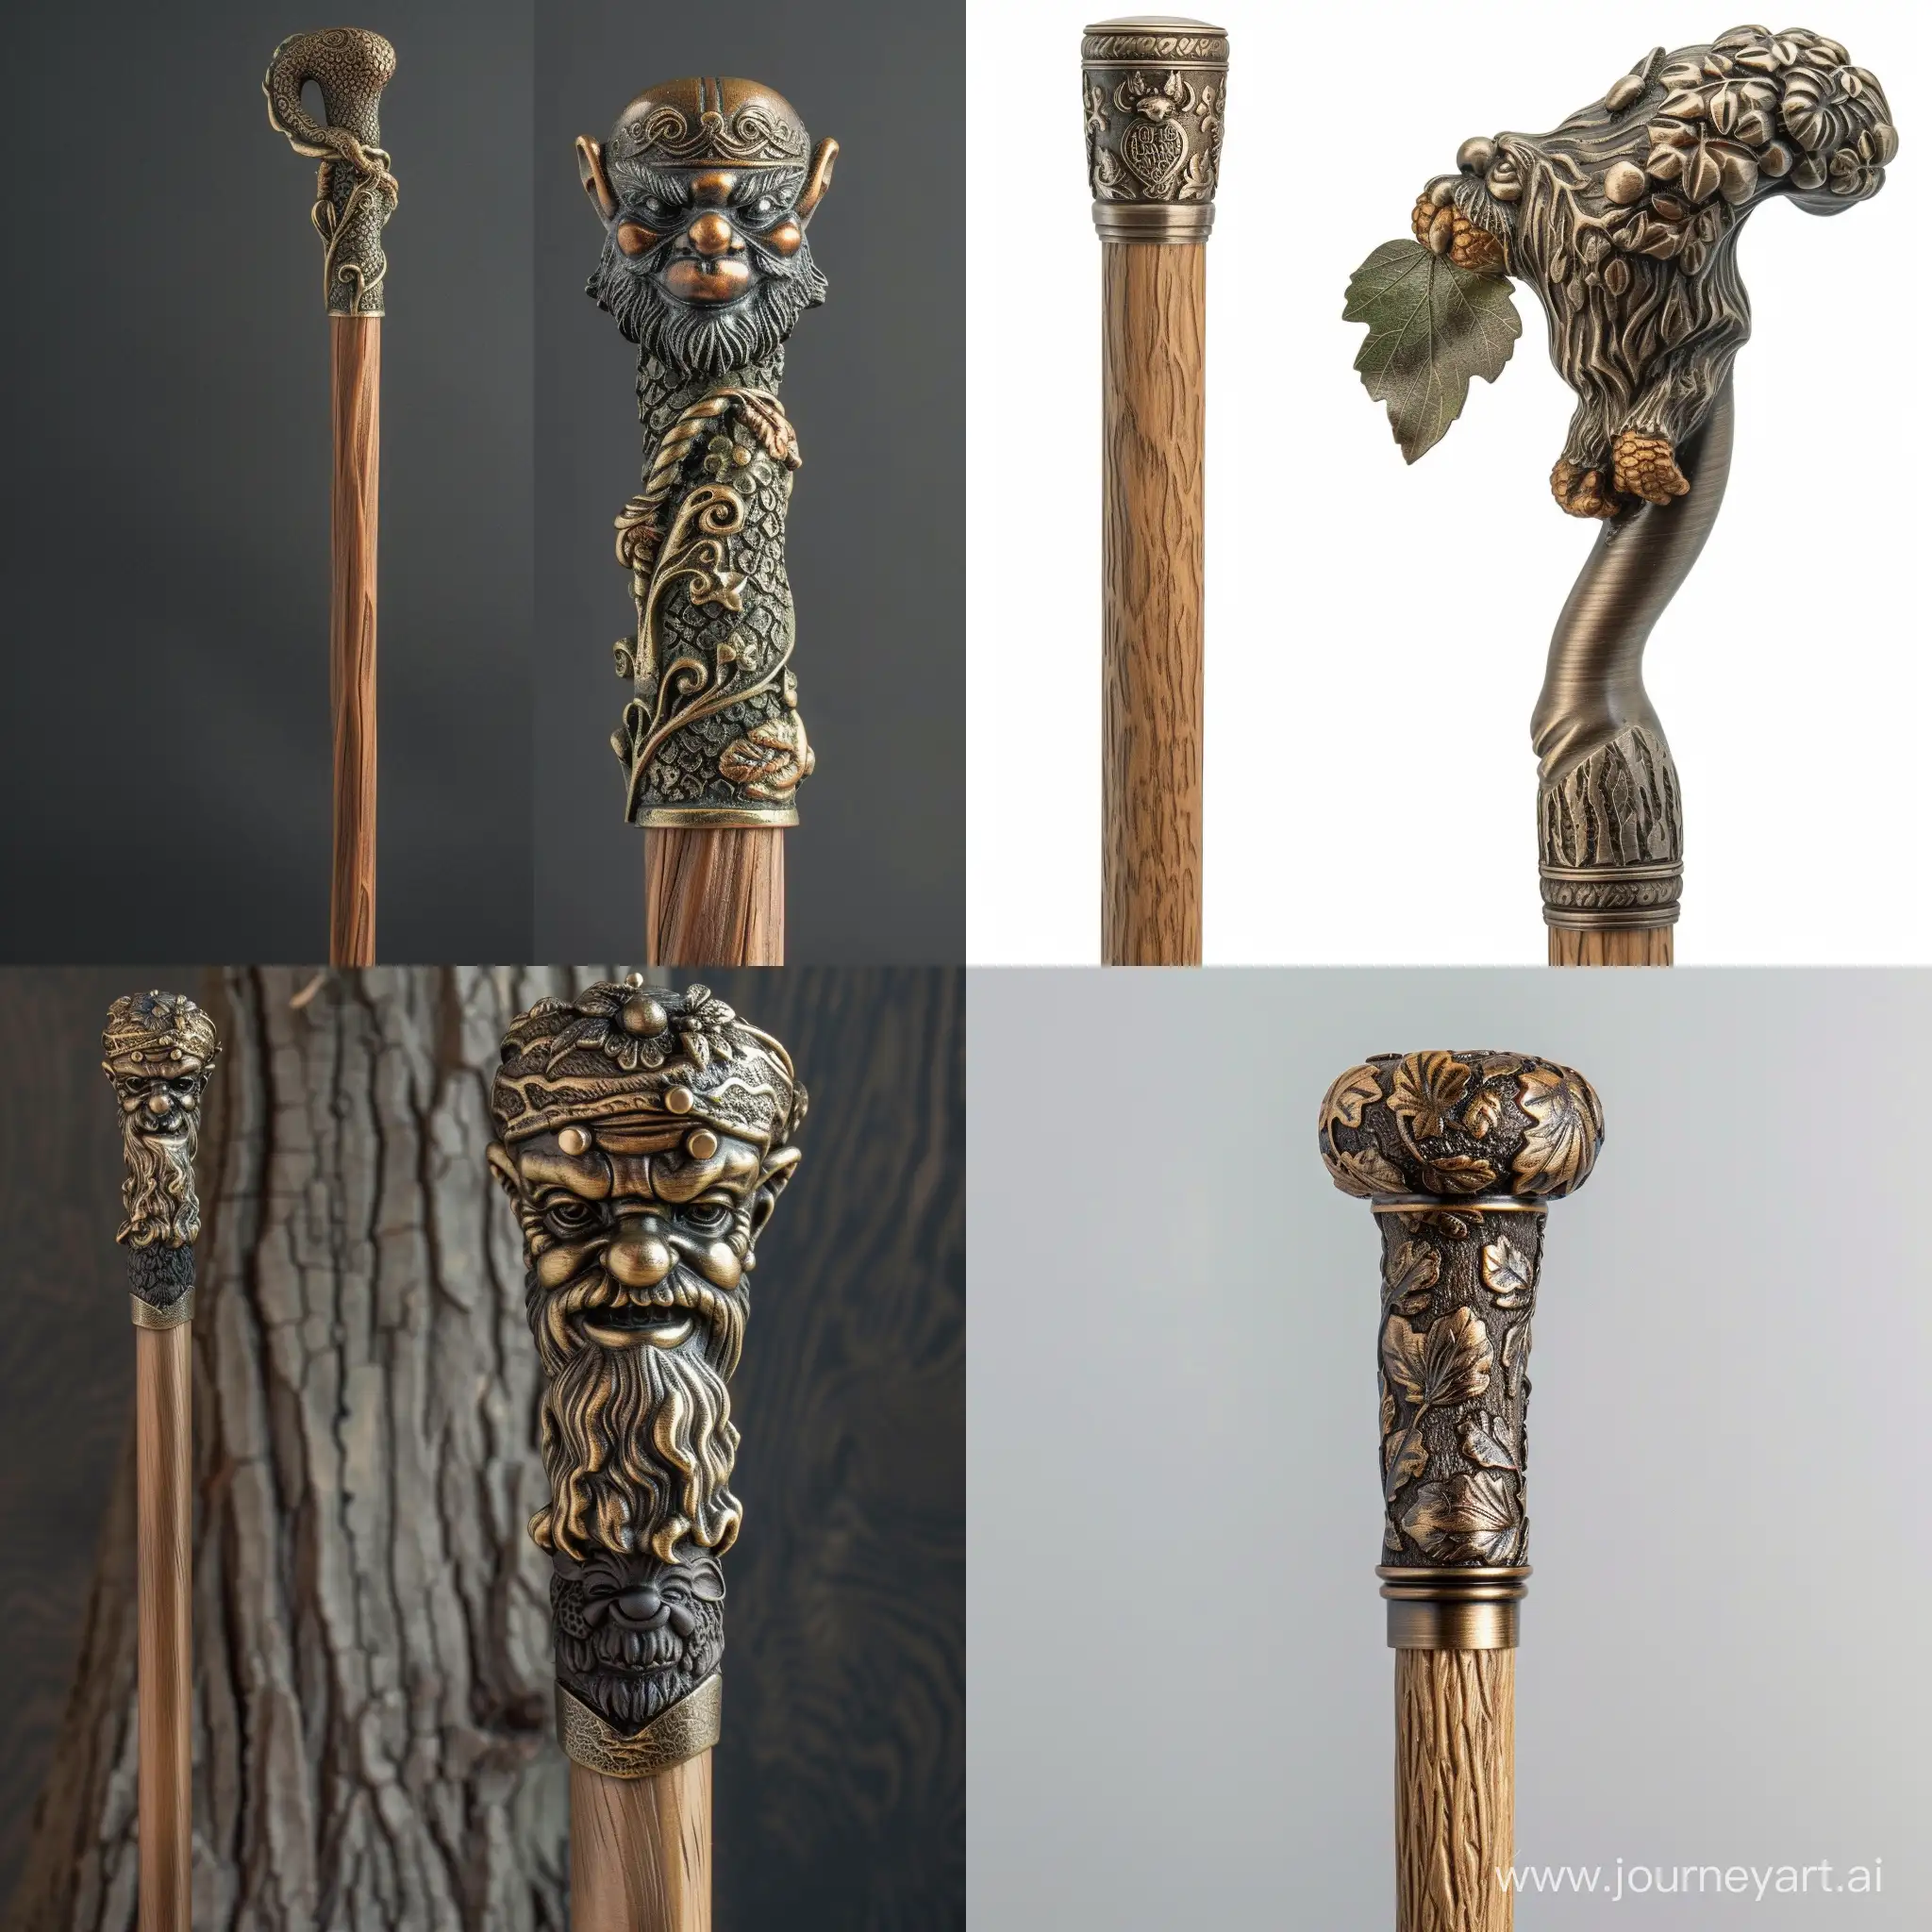 Cane with dwarf ornament, the head of the cane is made of bronze, the tree of the shaft is oak, hd, detailed
